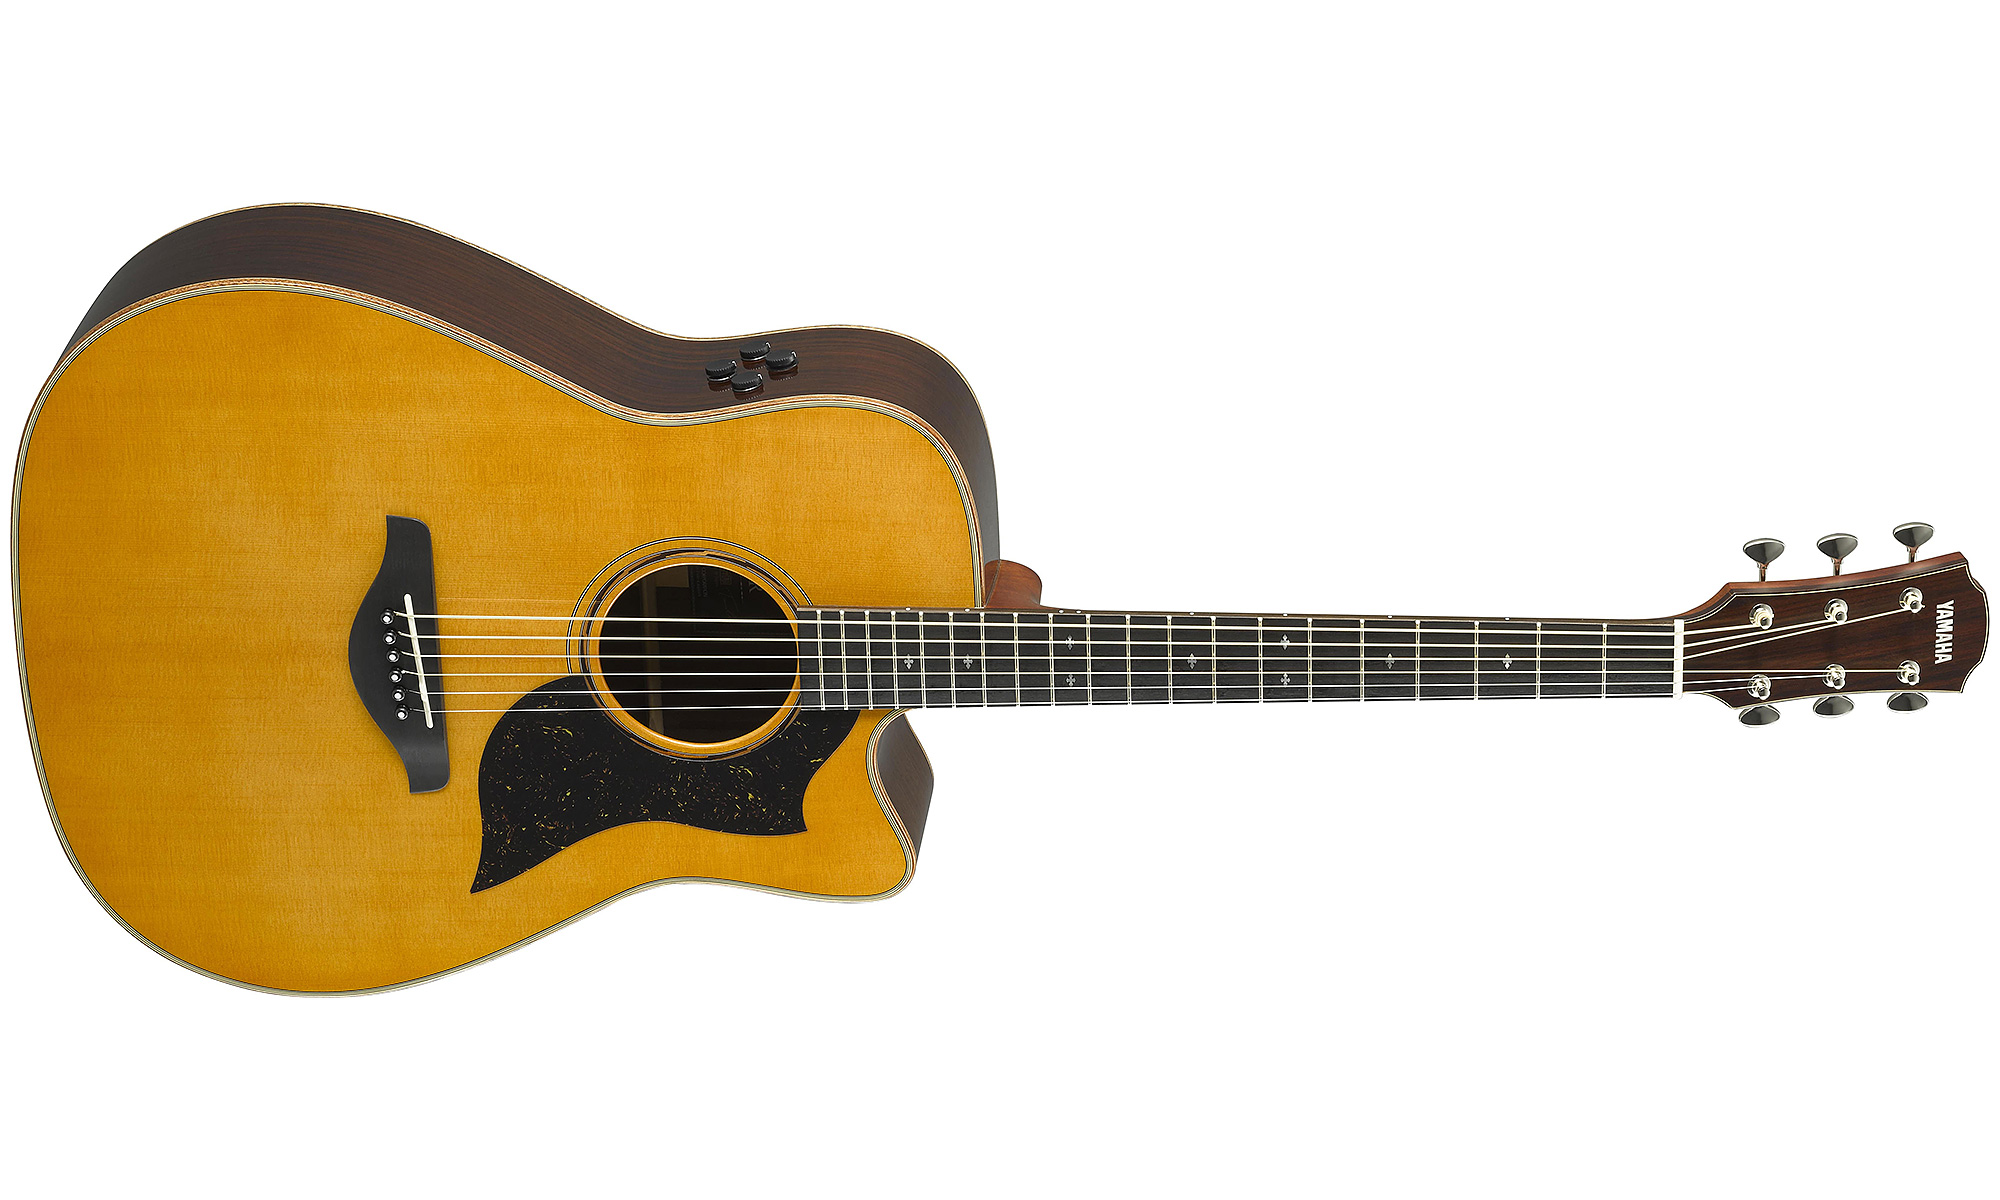 Yamaha A5r Are Vn Dreadnought Cw Epicea Palissandre Eb - Vintage Natural - Guitare Electro Acoustique - Variation 1